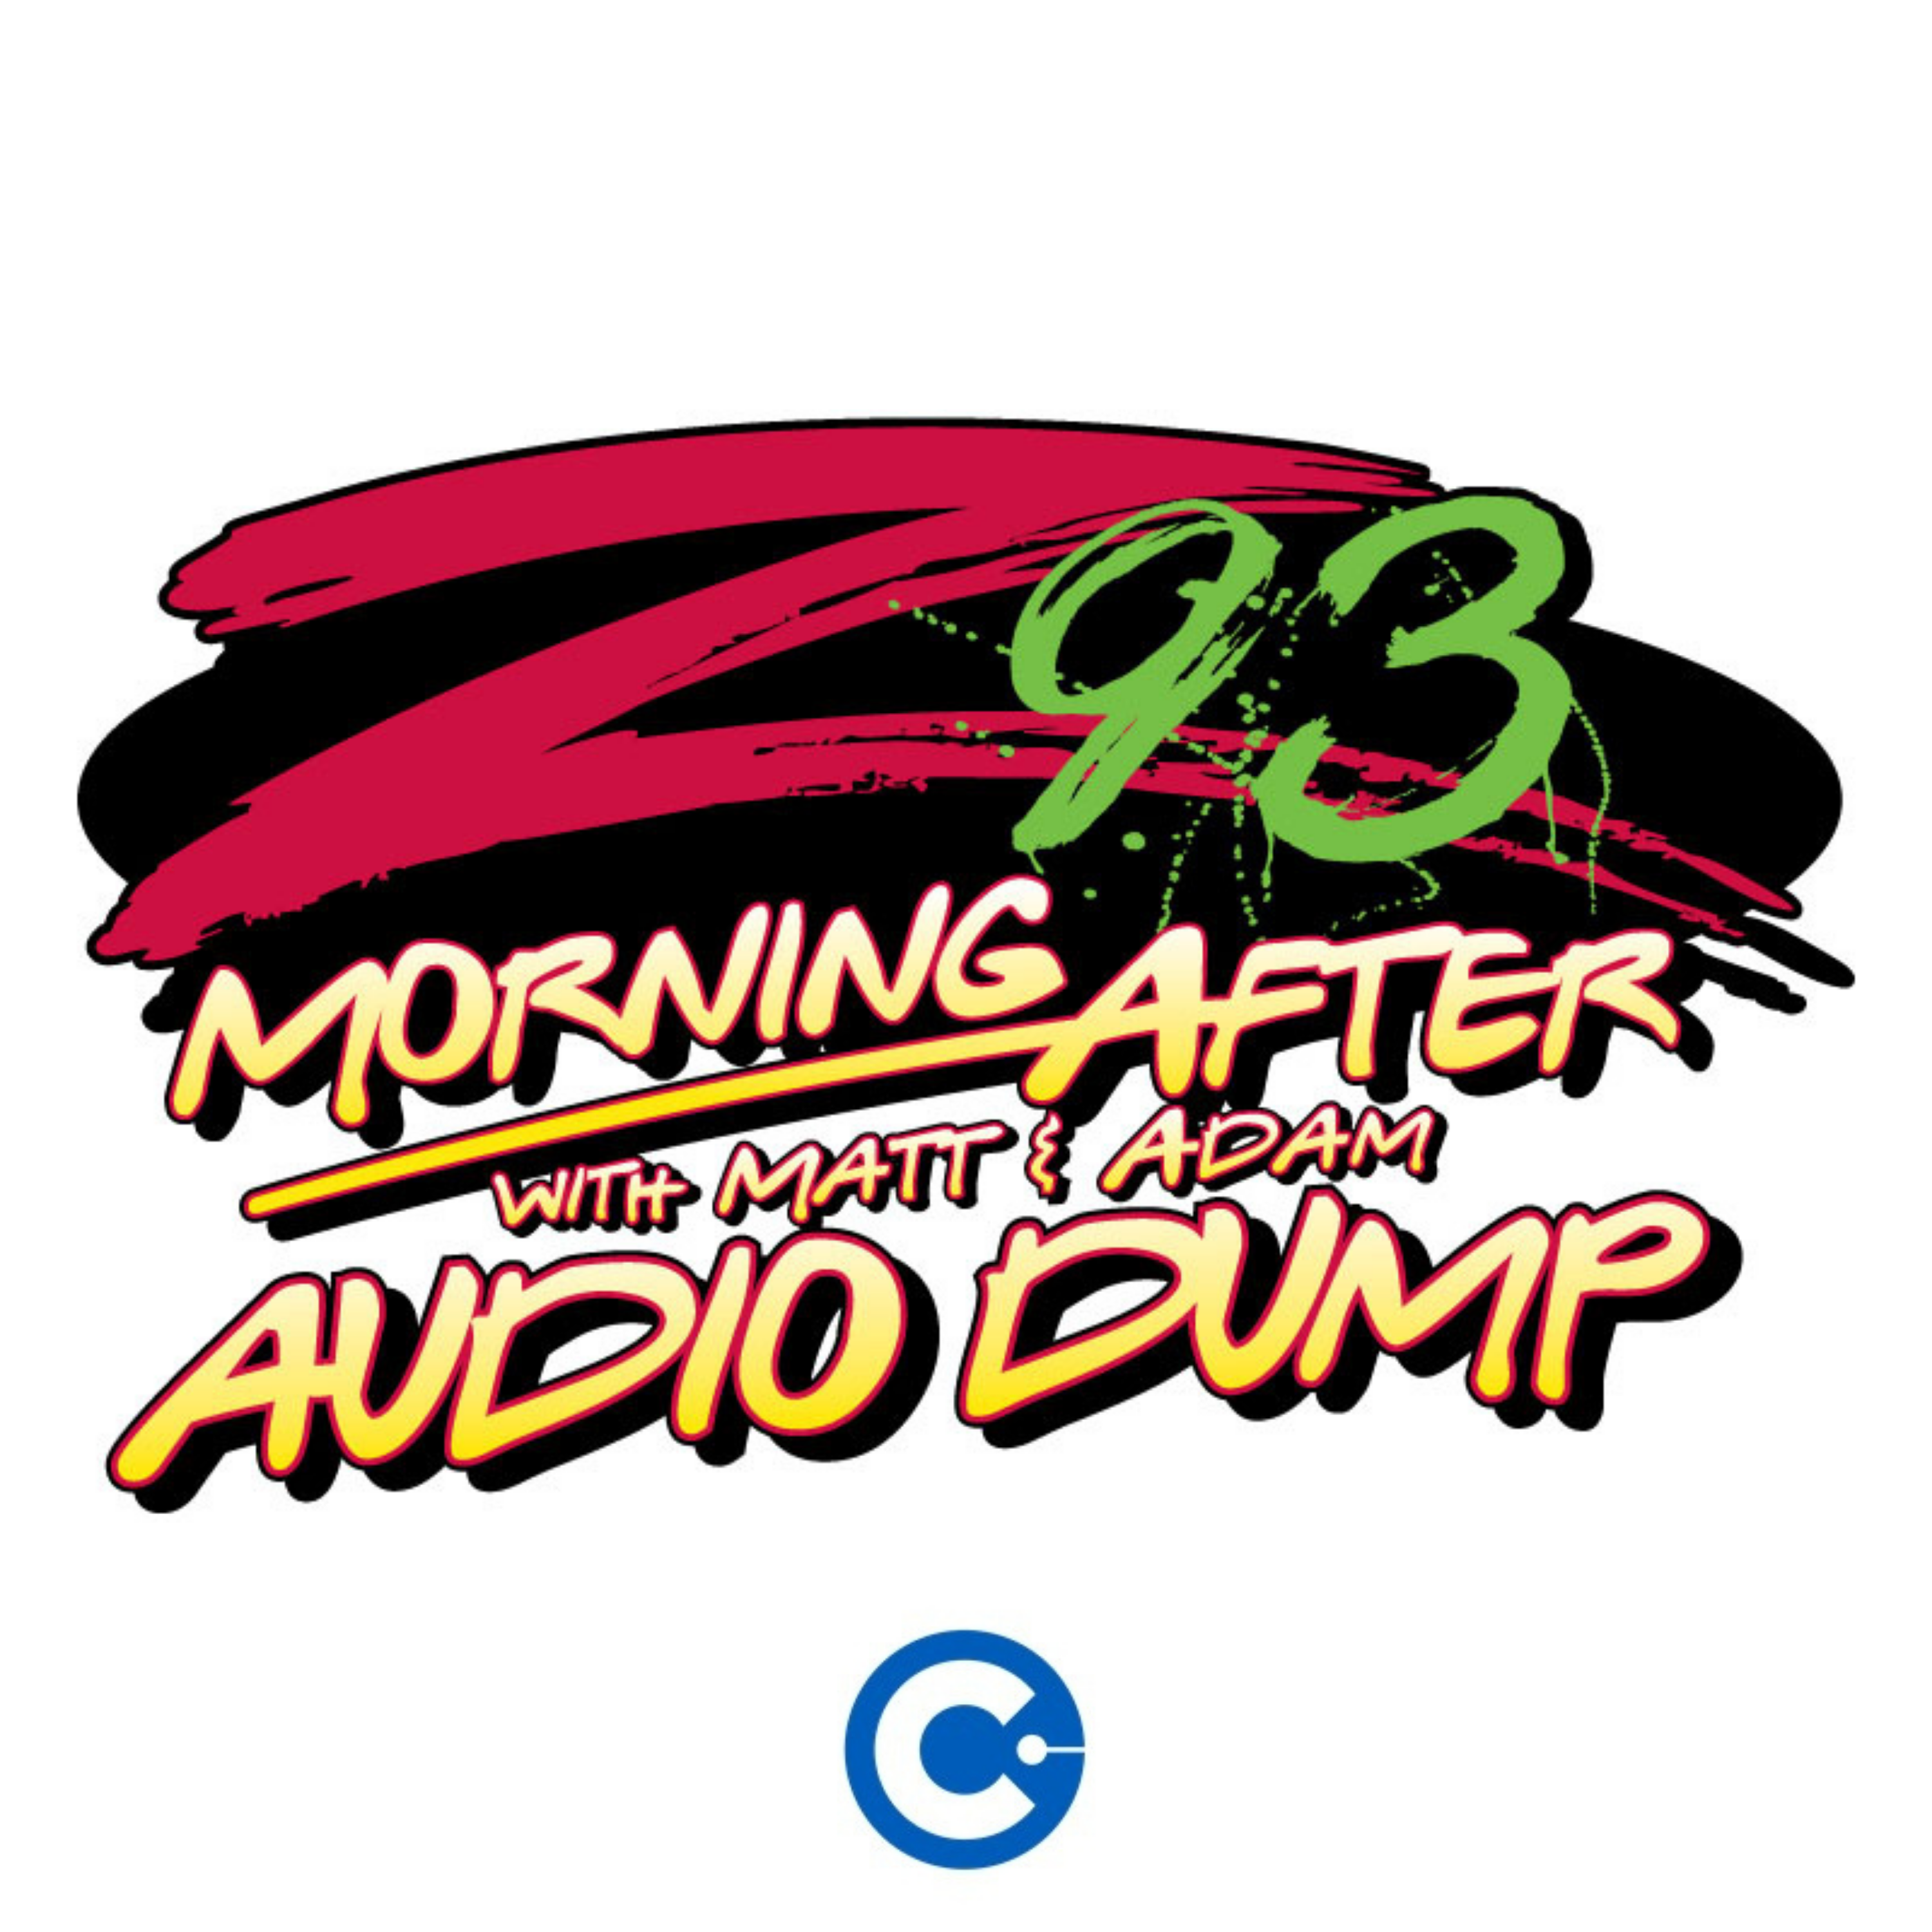 The Morning After’s Audio Dump Podcast